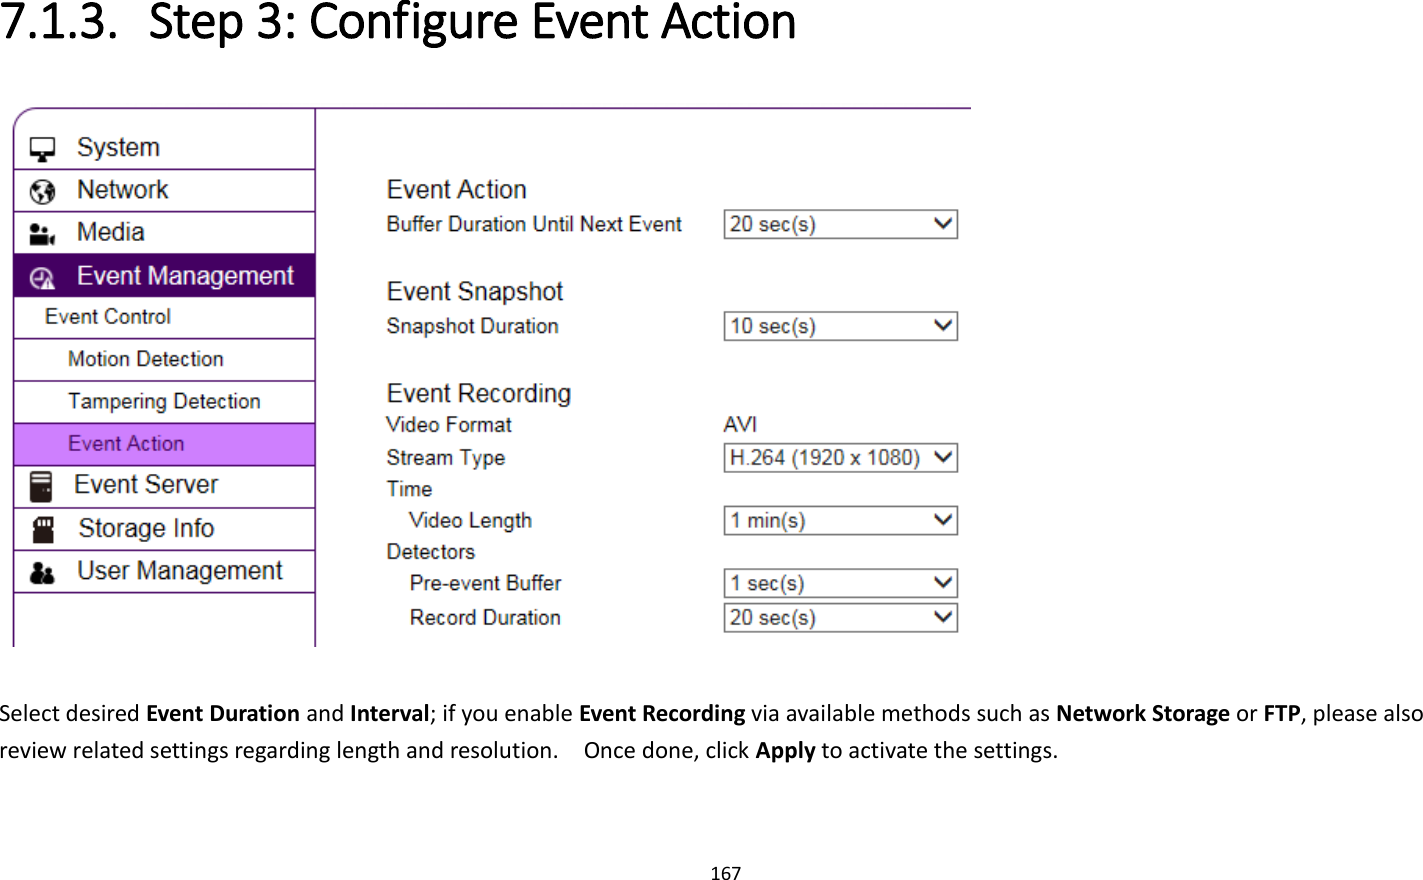 167  7.1.3. Step 3: Configure Event Action   Select desired Event Duration and Interval; if you enable Event Recording via available methods such as Network Storage or FTP, please also review related settings regarding length and resolution.    Once done, click Apply to activate the settings. 